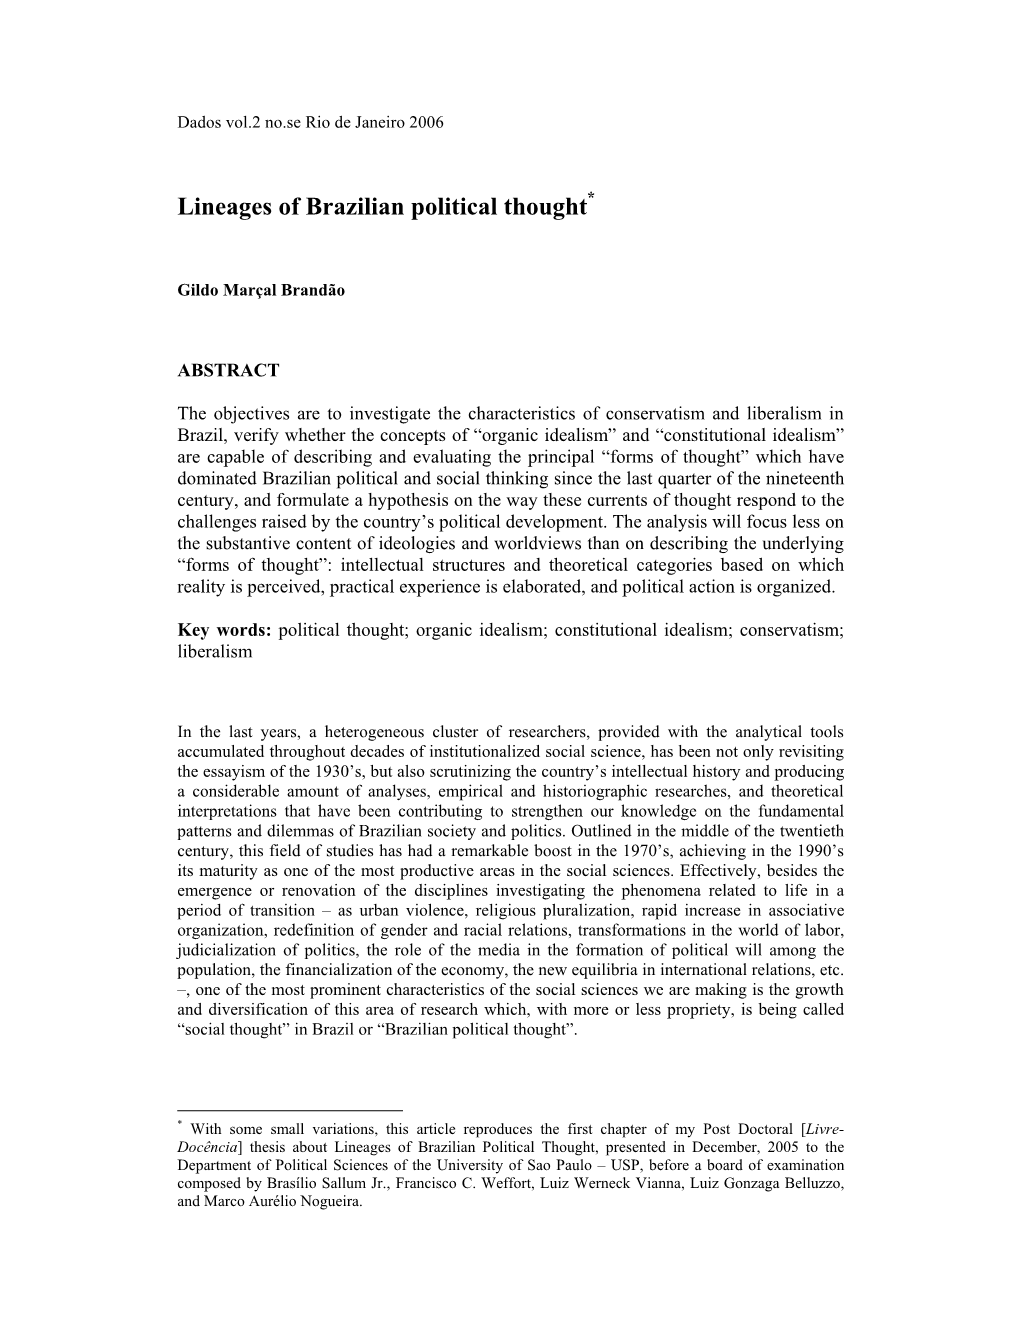 Lineages of Brazilian Political Thought*